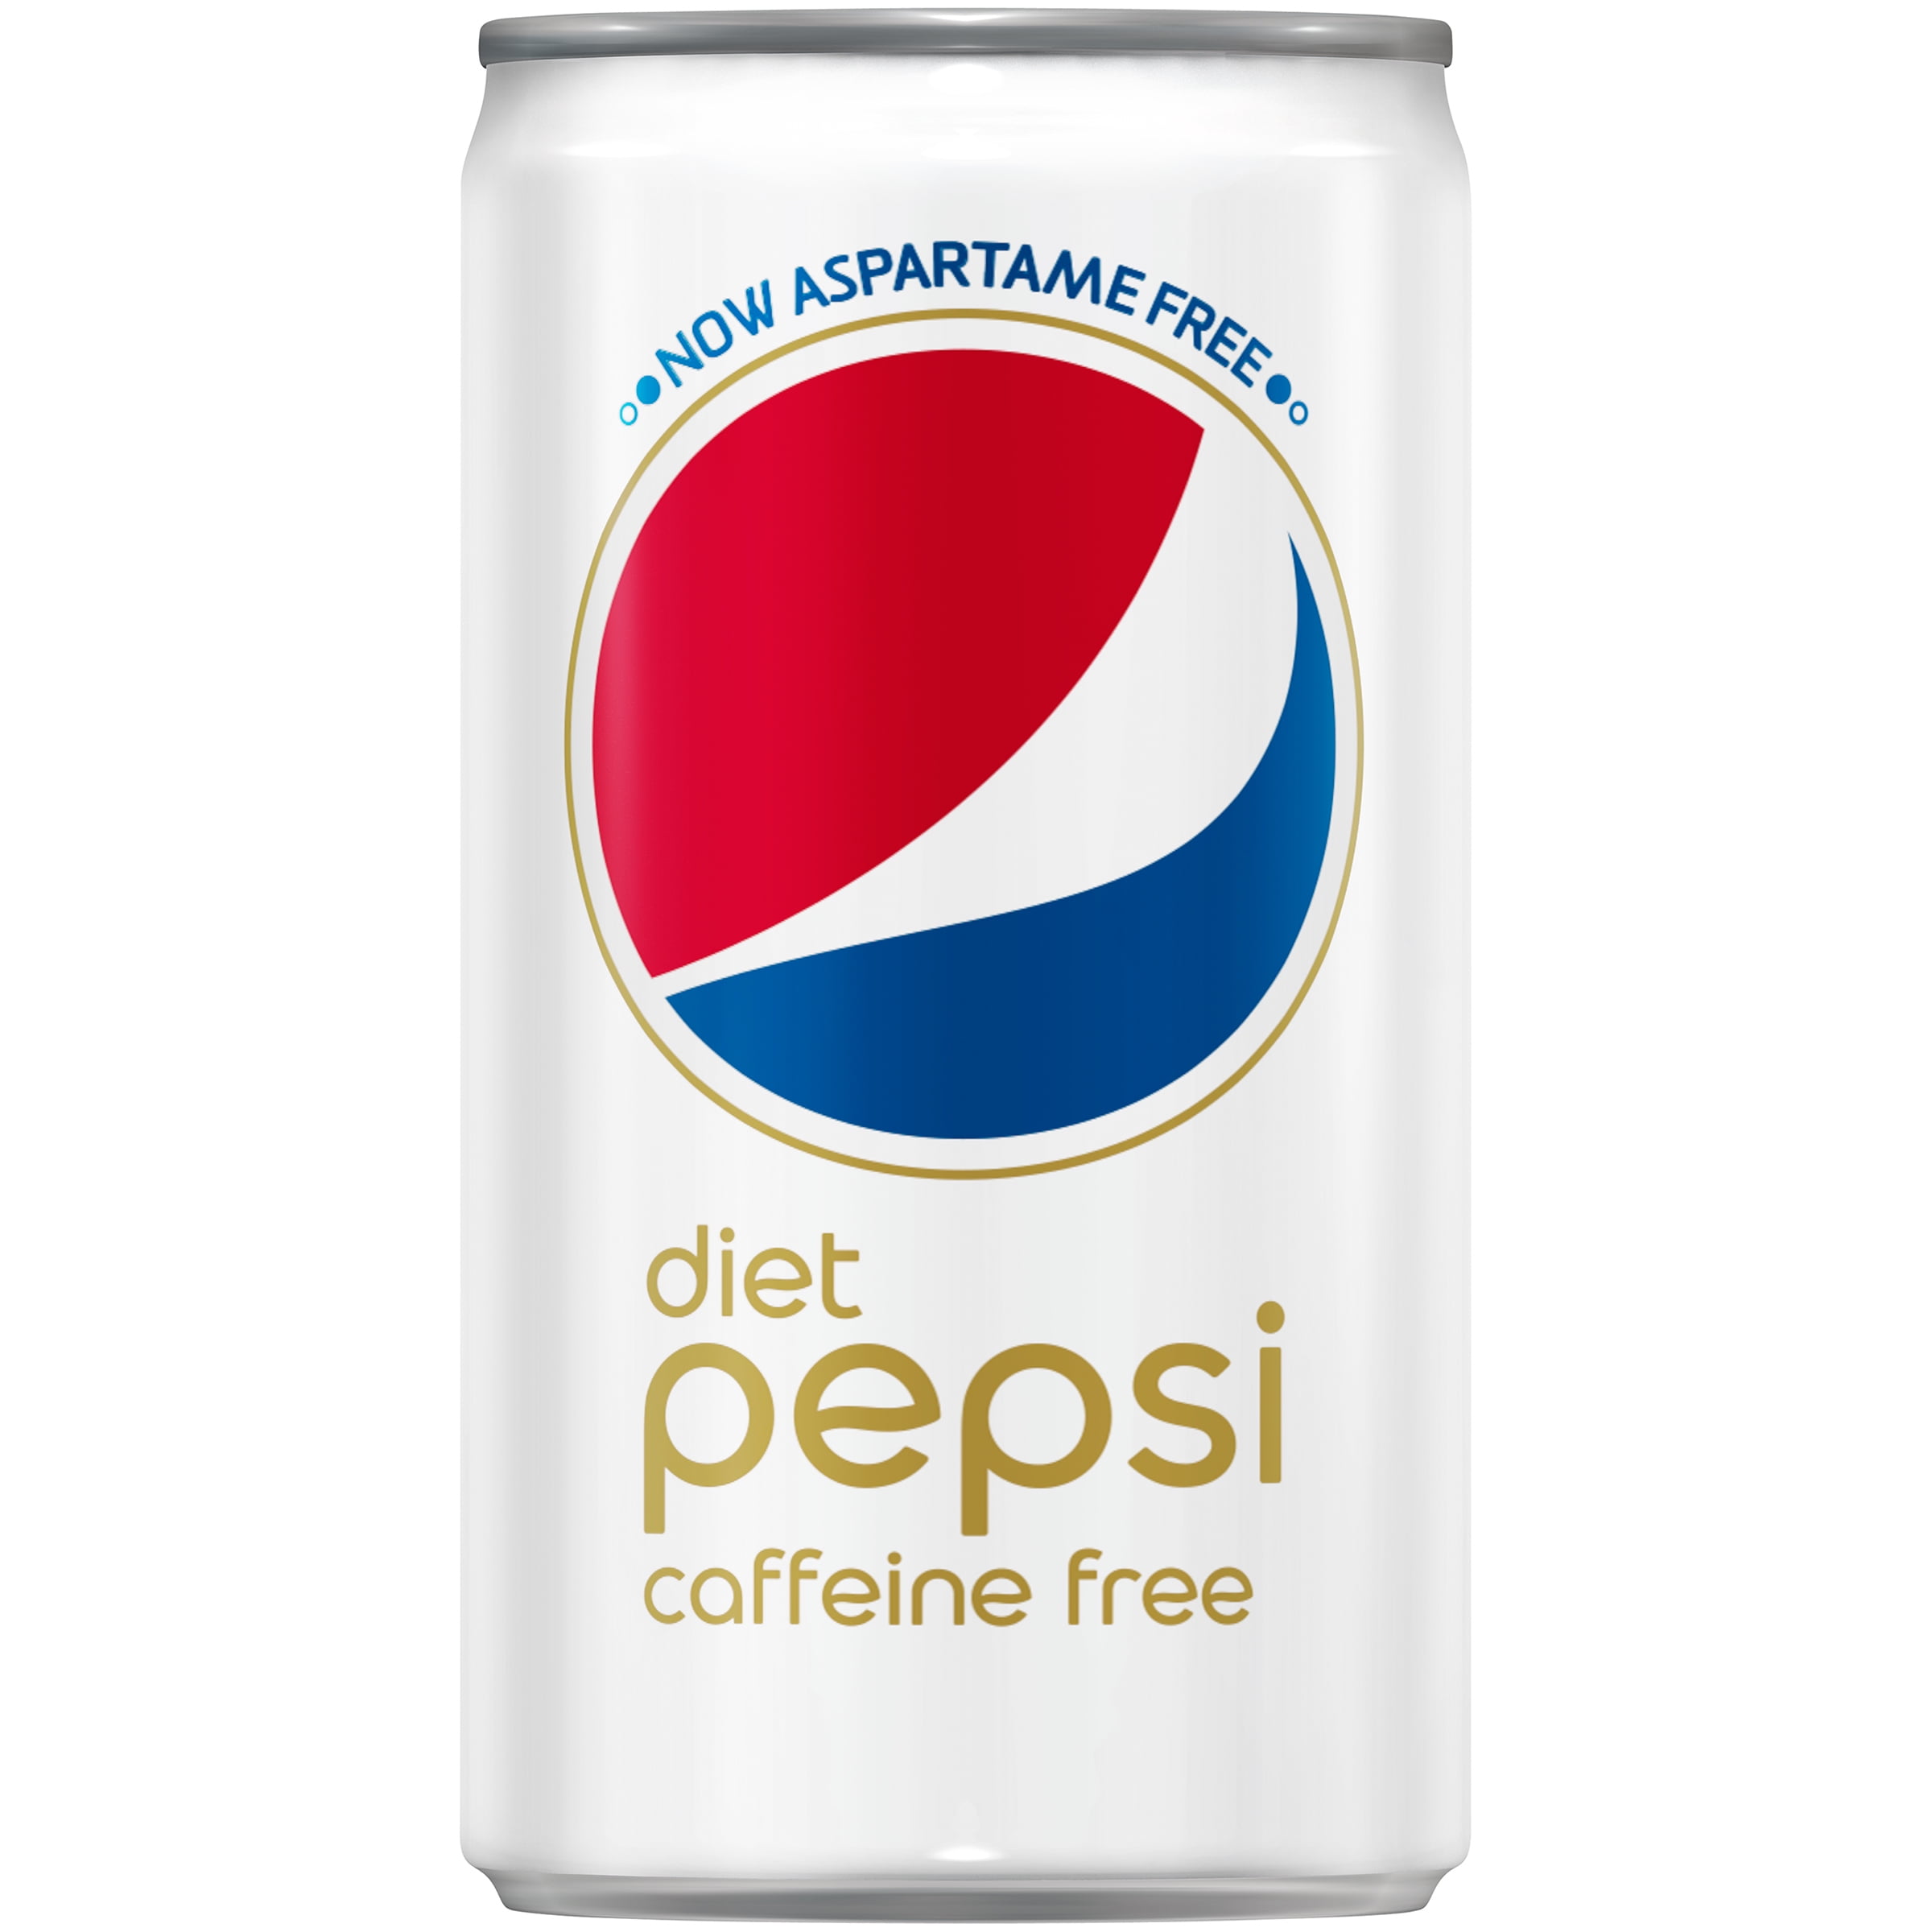 can you order caffeine free diet pepsi